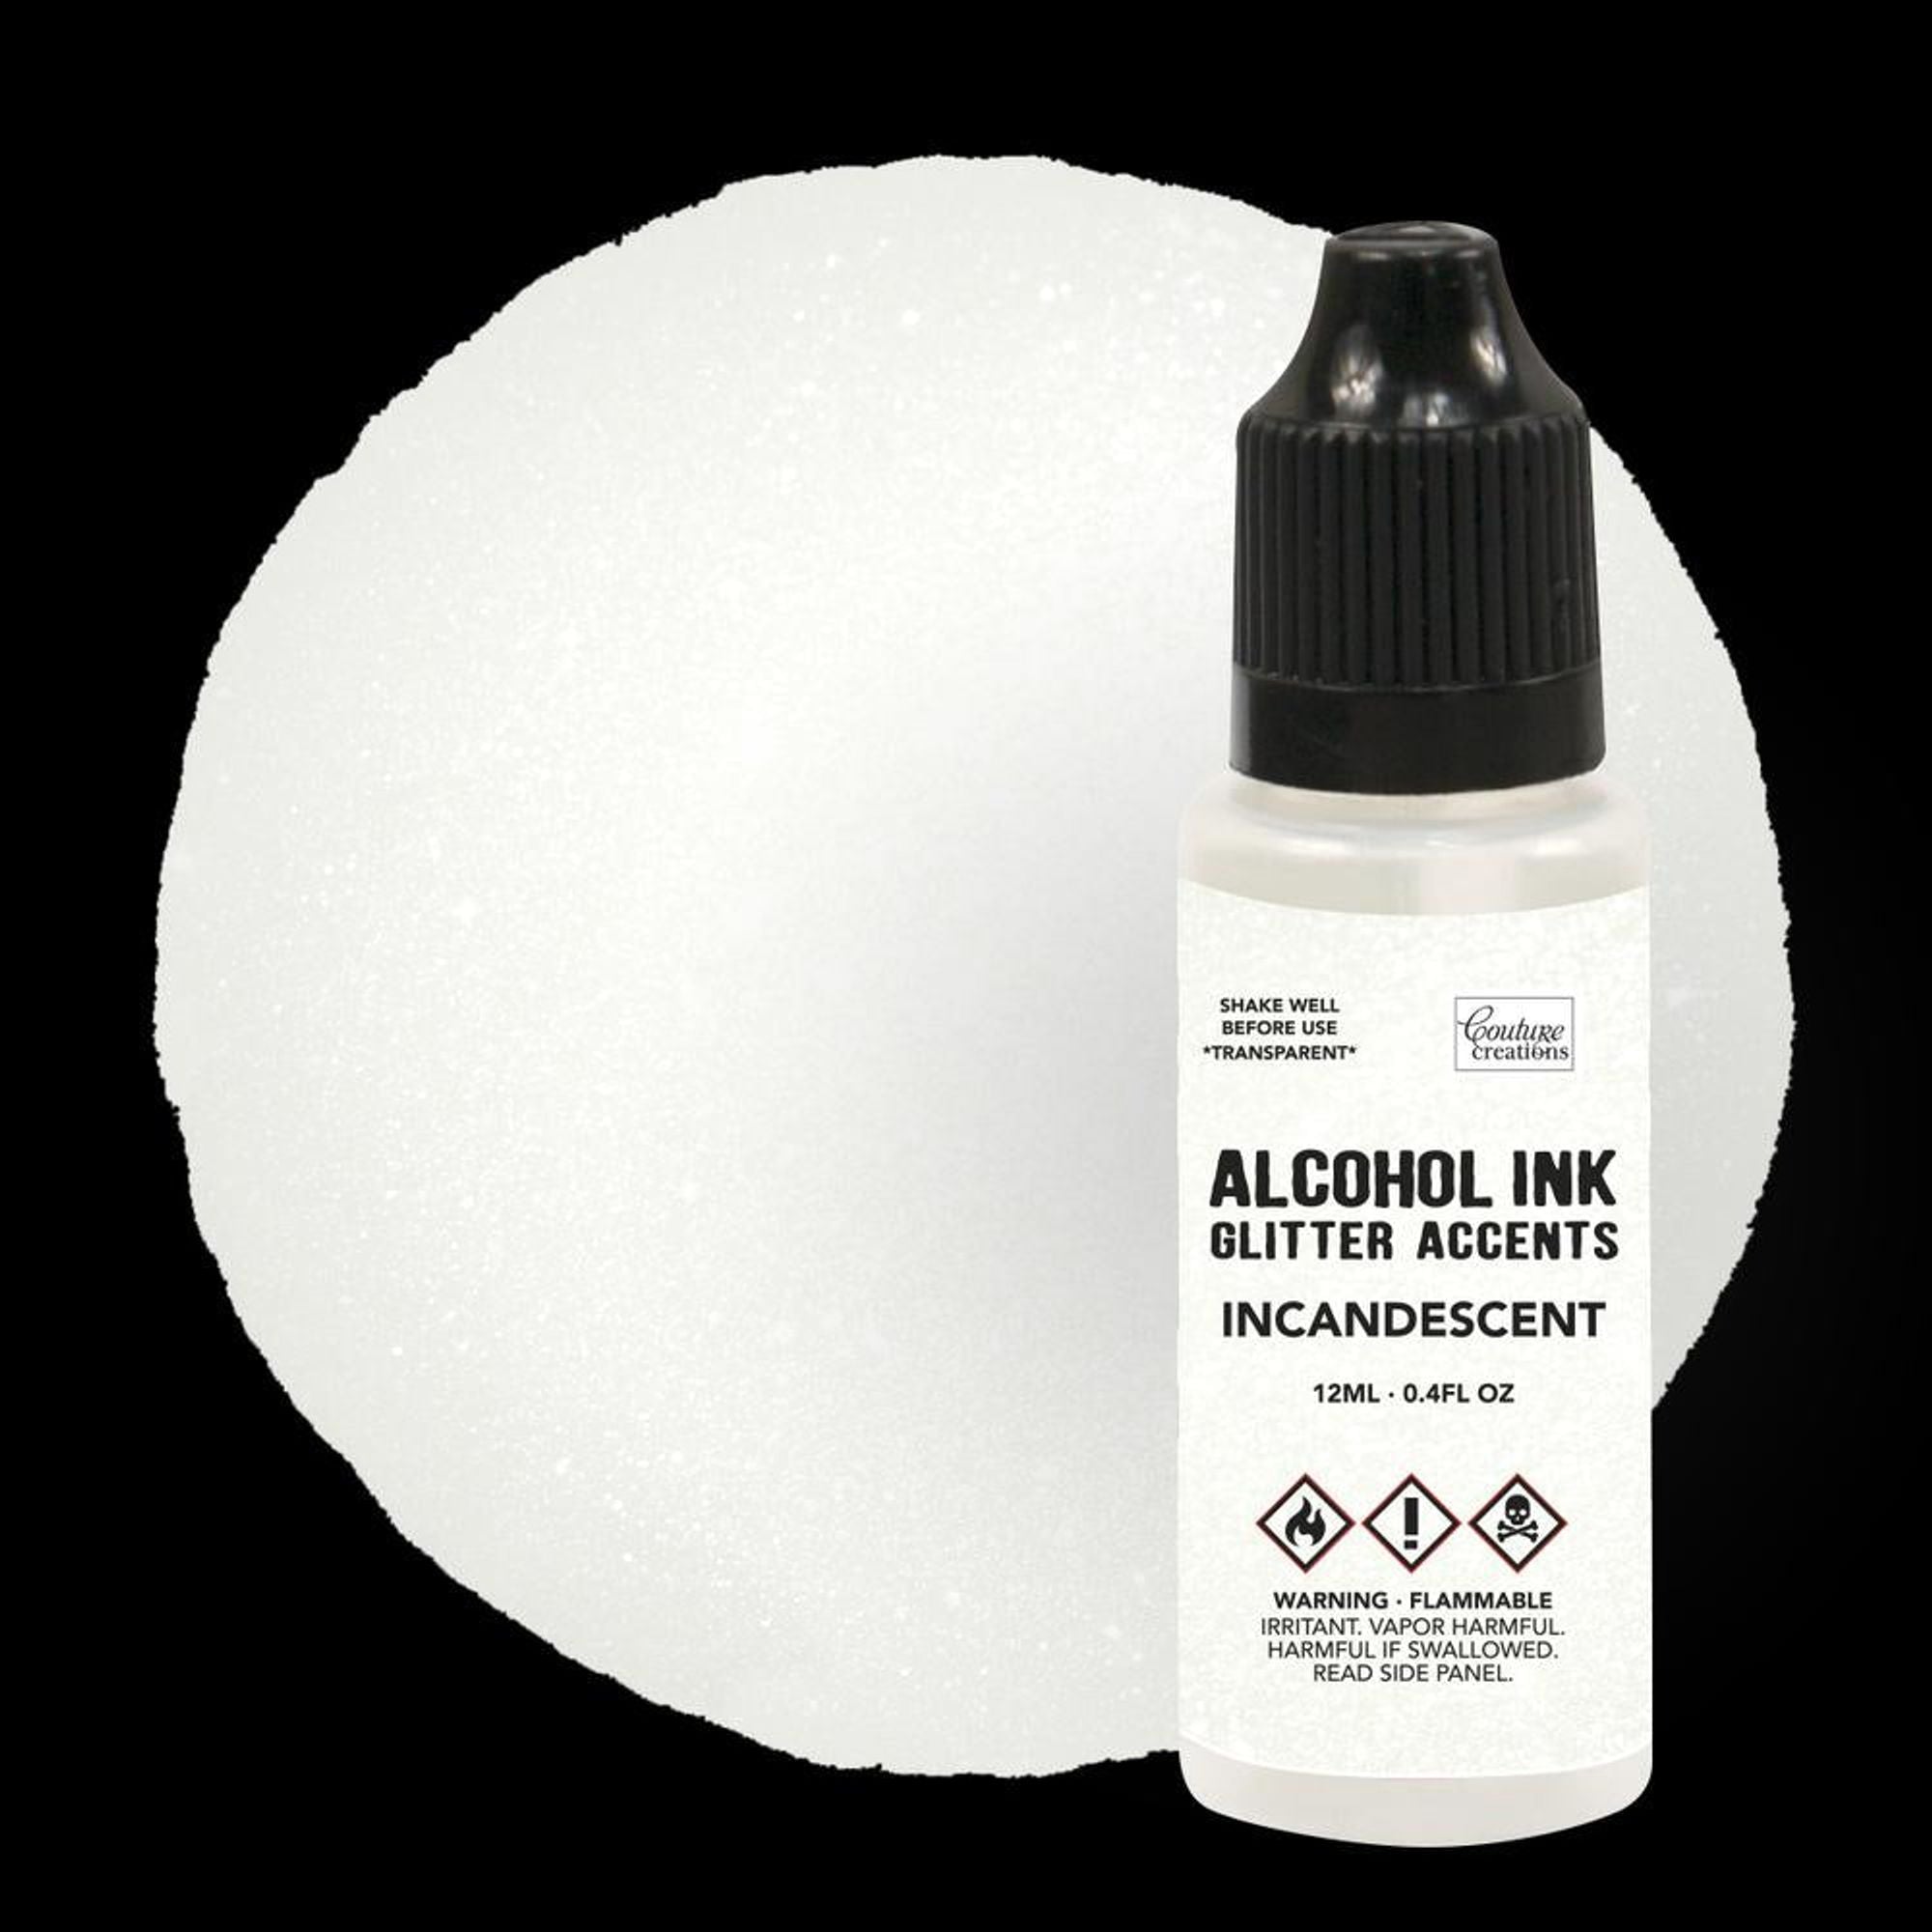 Alcohol Ink Paper Blending Solution and Alcohol Blending Brushes, Alcohol  Ink Supplies Include 25 Sheets Medium 5x7-Inch, 4-Ounce Blending Solution